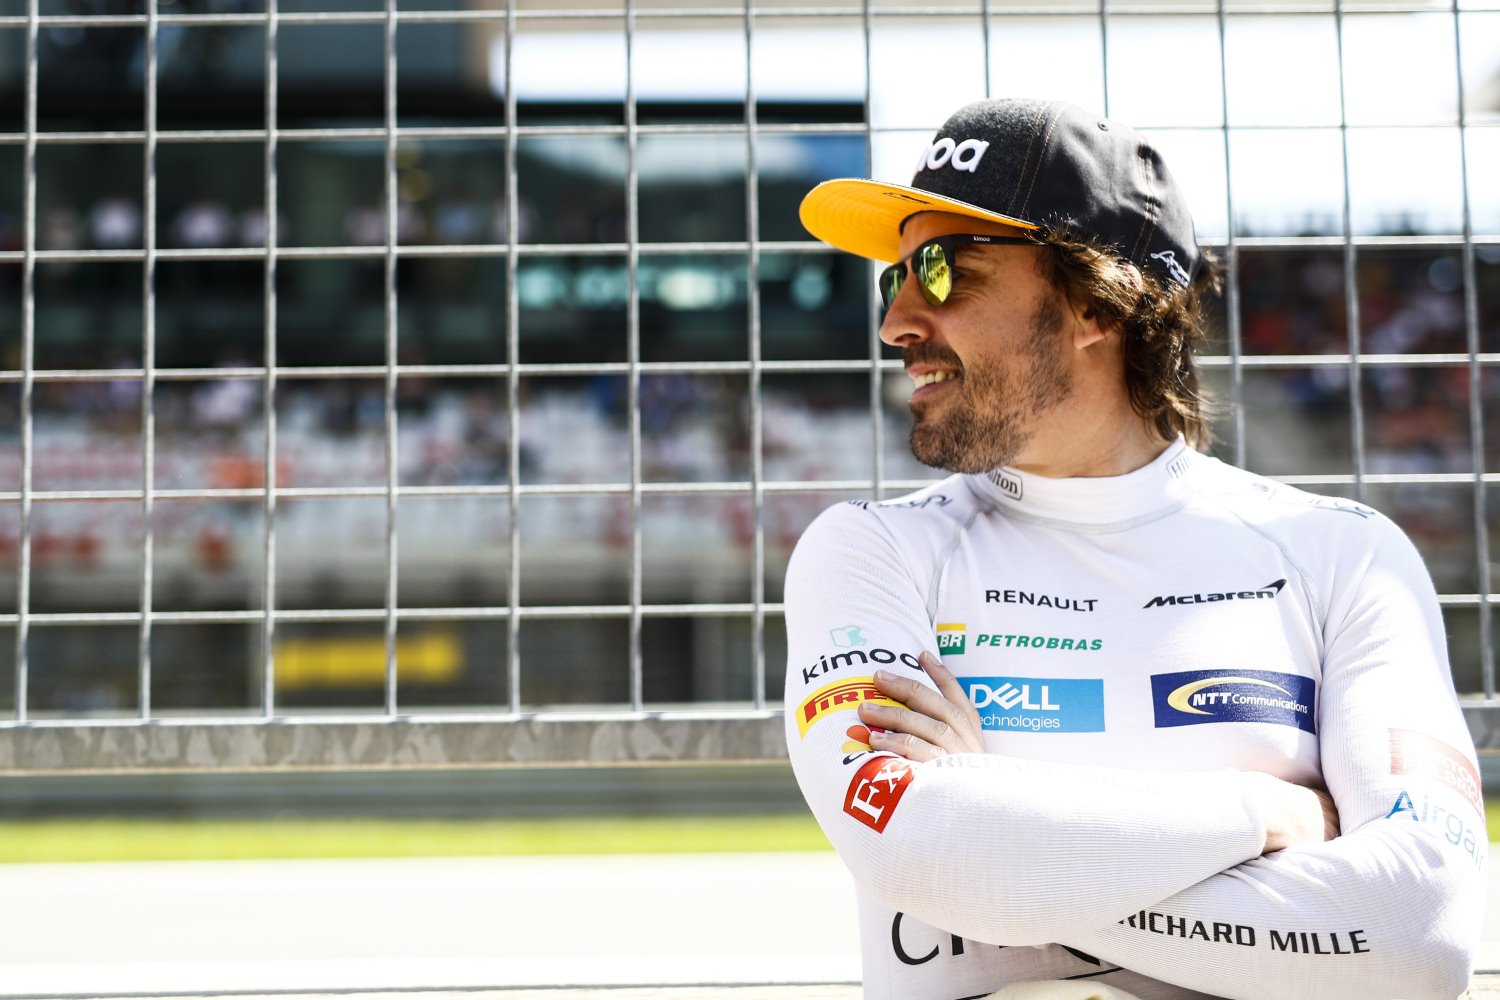 Alonso looks back on his F1 career